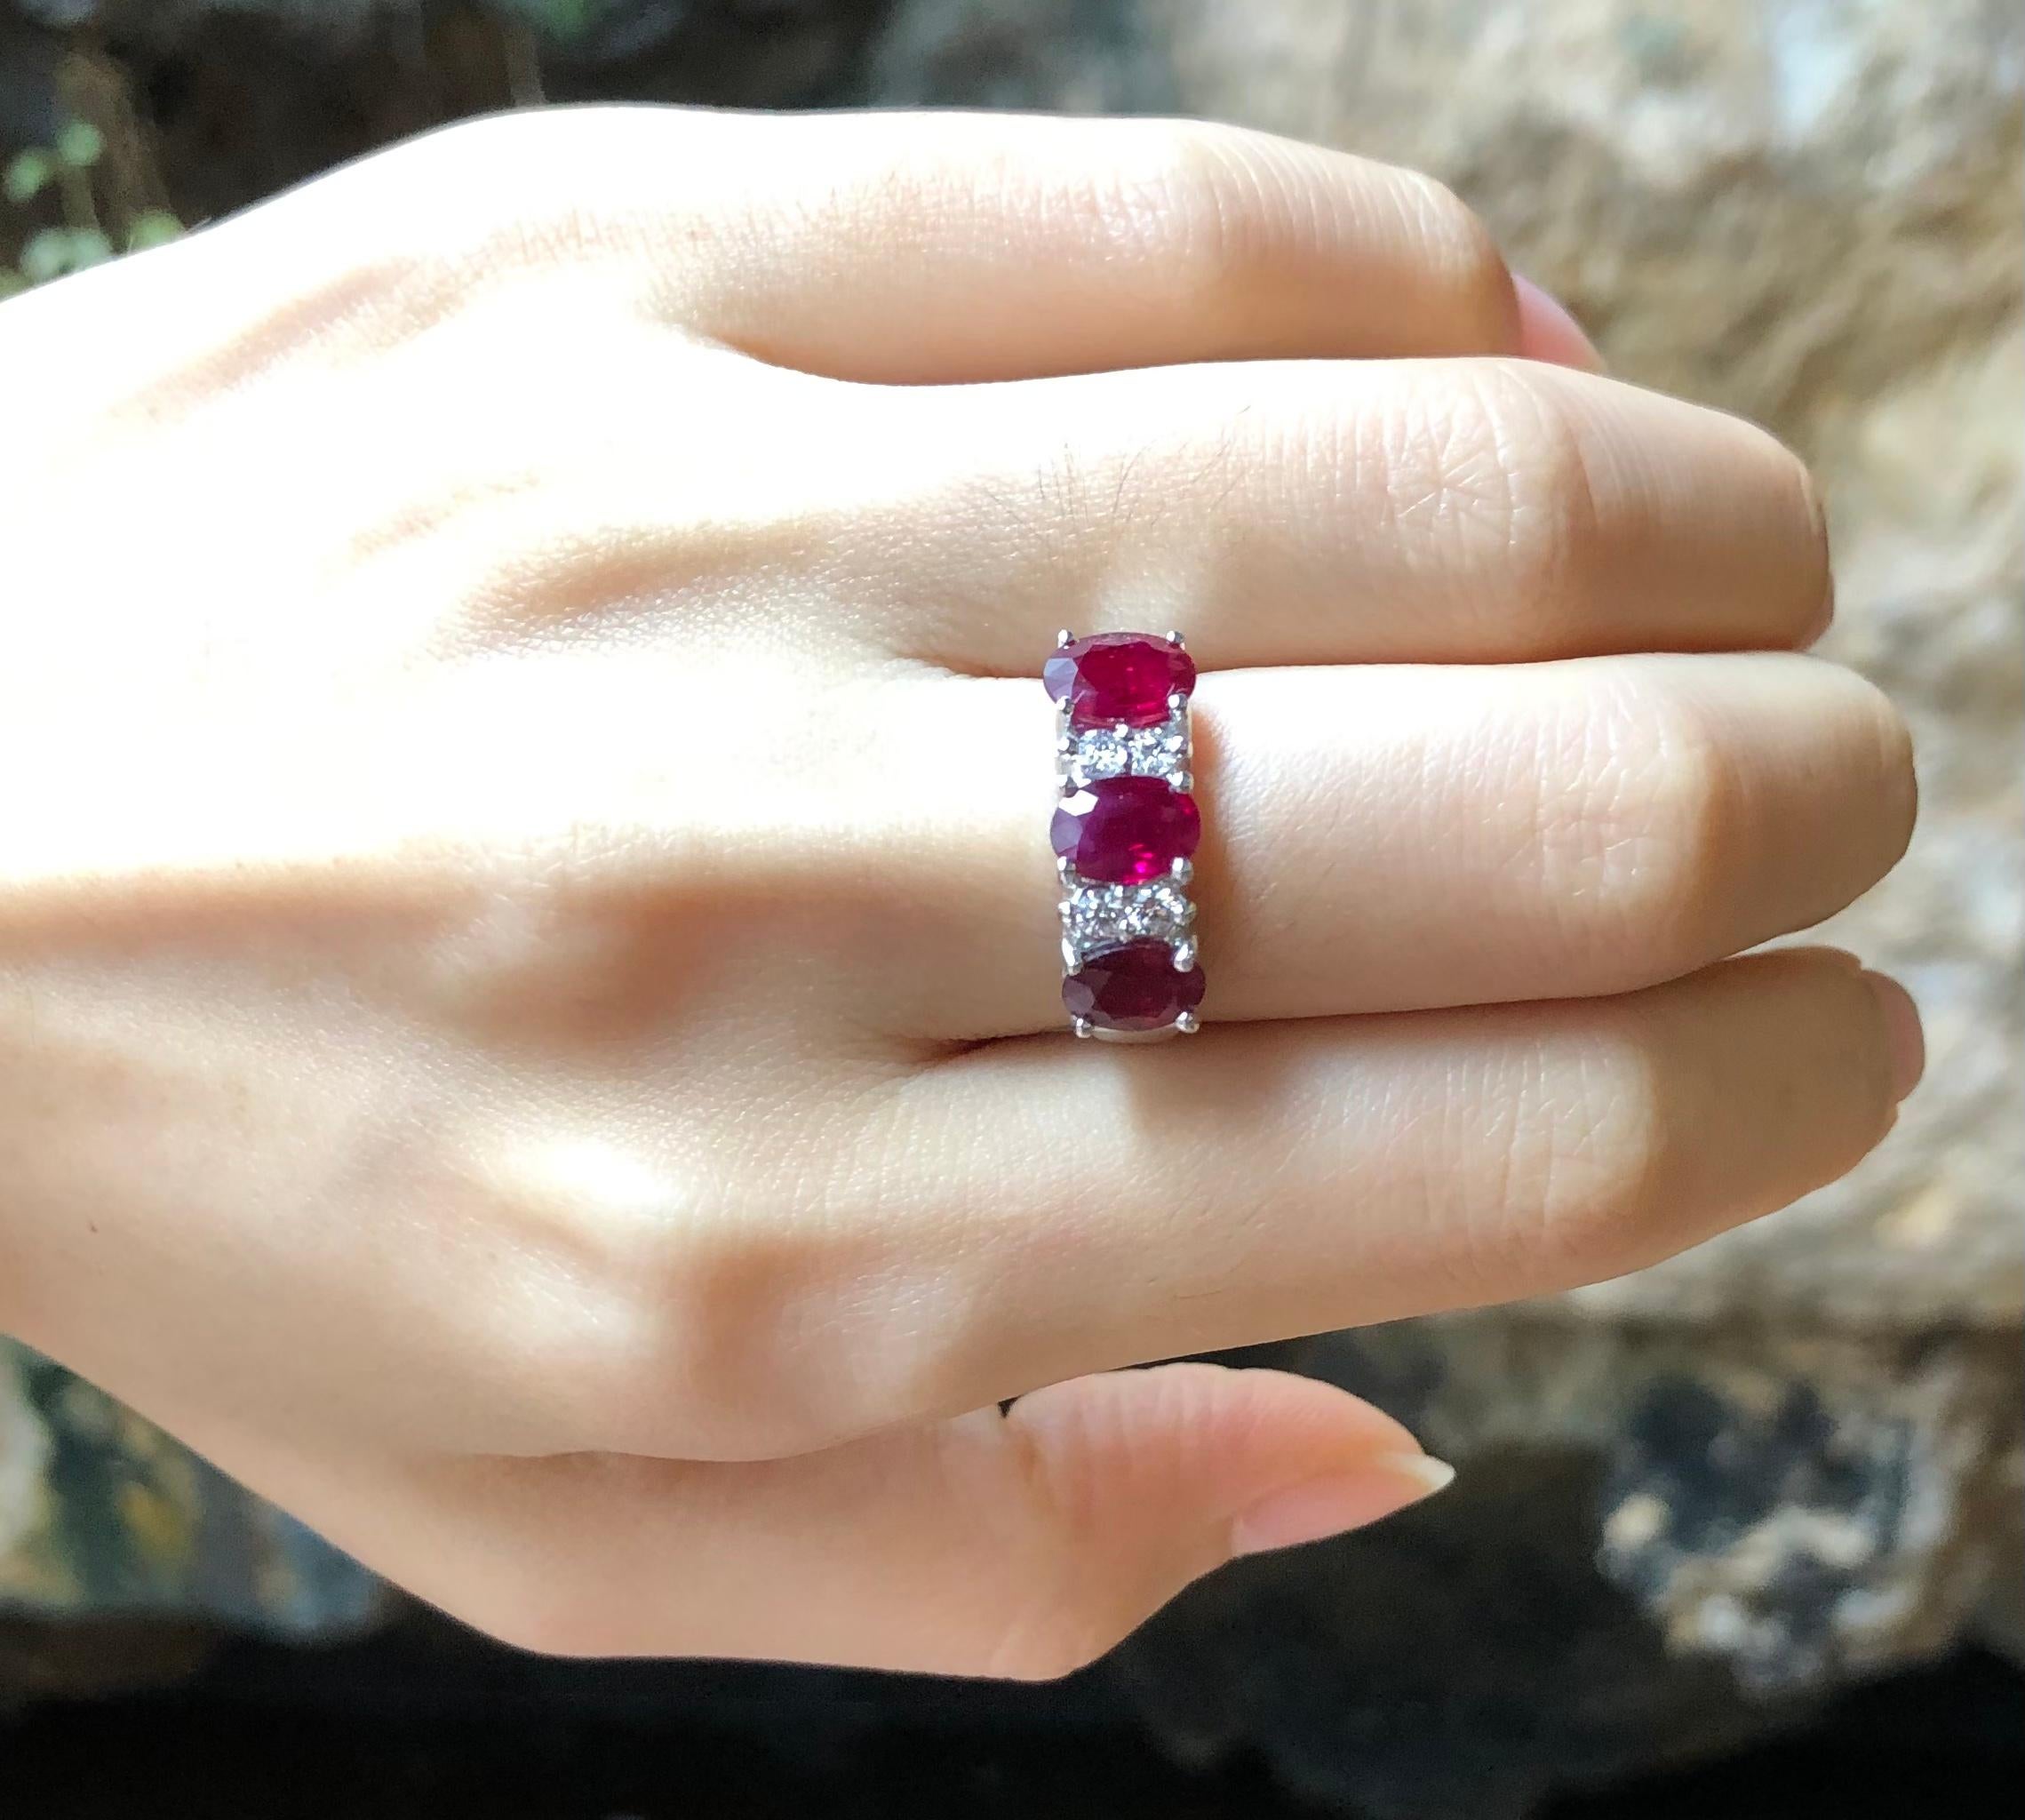 Ruby 2.67 carats with Diamond 0.18 carat Ring set in 18 Karat White Gold Settings

Width:  1.9 cm 
Length:  0.7 cm
Ring Size: 51
Total Weight: 5.5 grams

